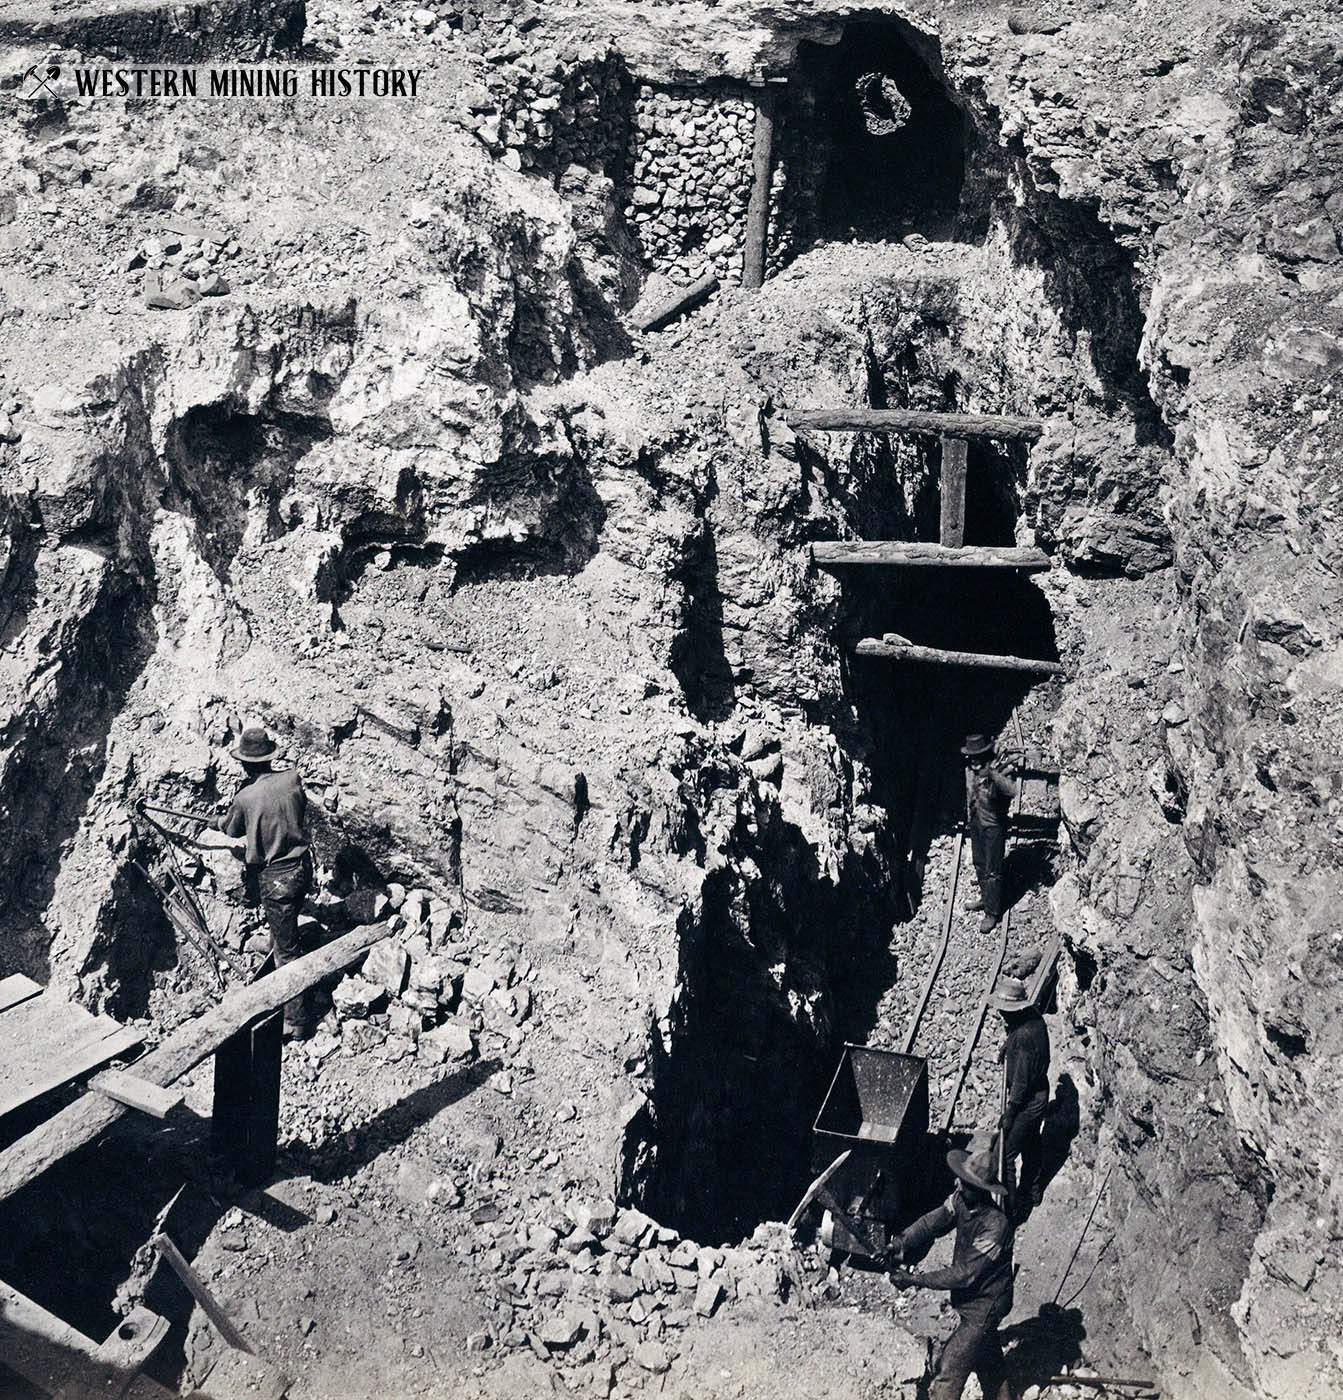 Closer look at the miners working the Tough Nut mine 1880